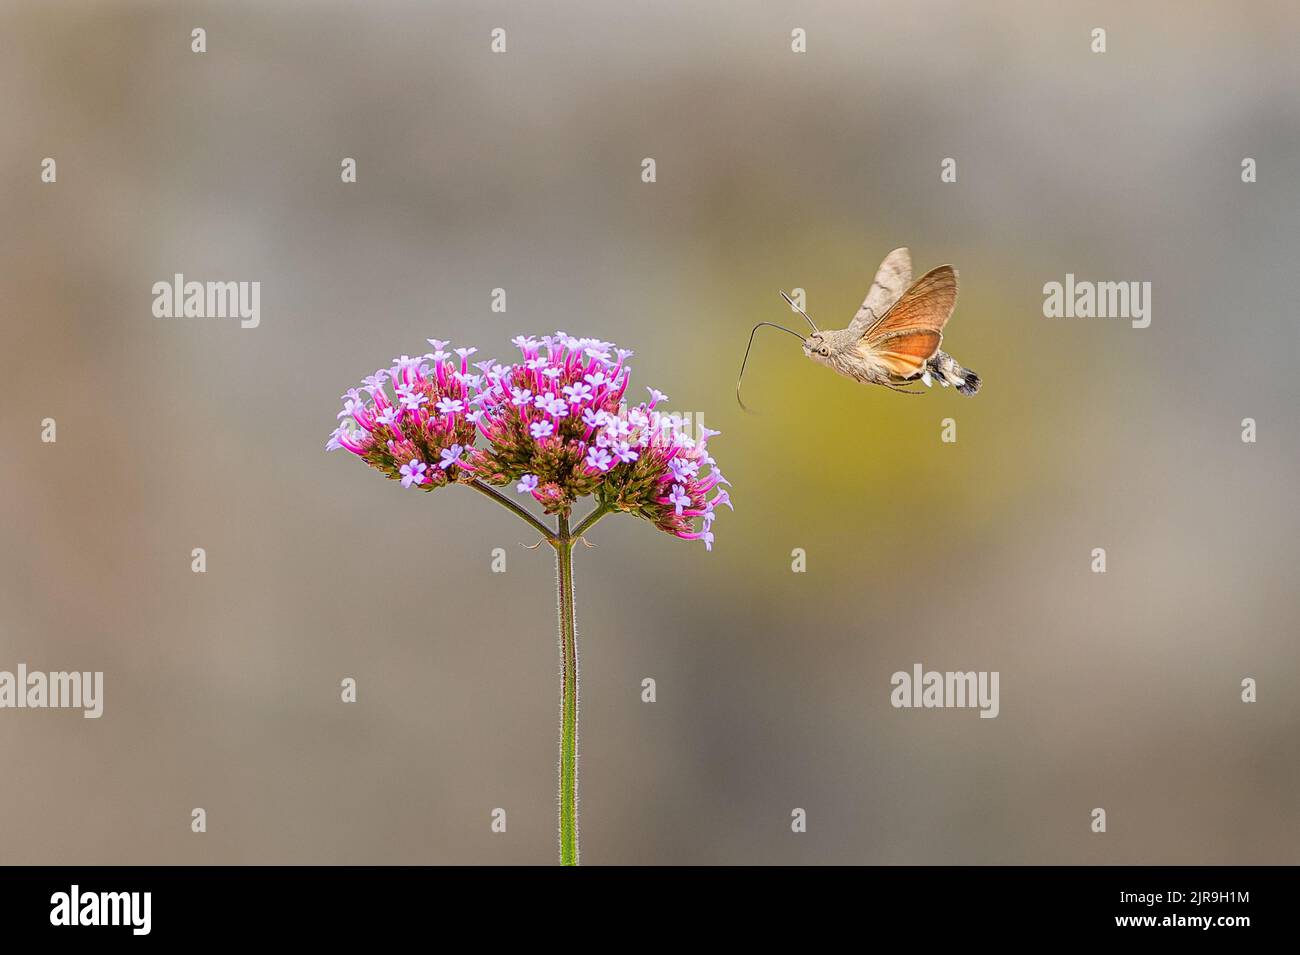 The hummingbird hawk moth with long proboscis flying around a purple flower growing in a garden. Blurry grey and yellow background. Stock Photo